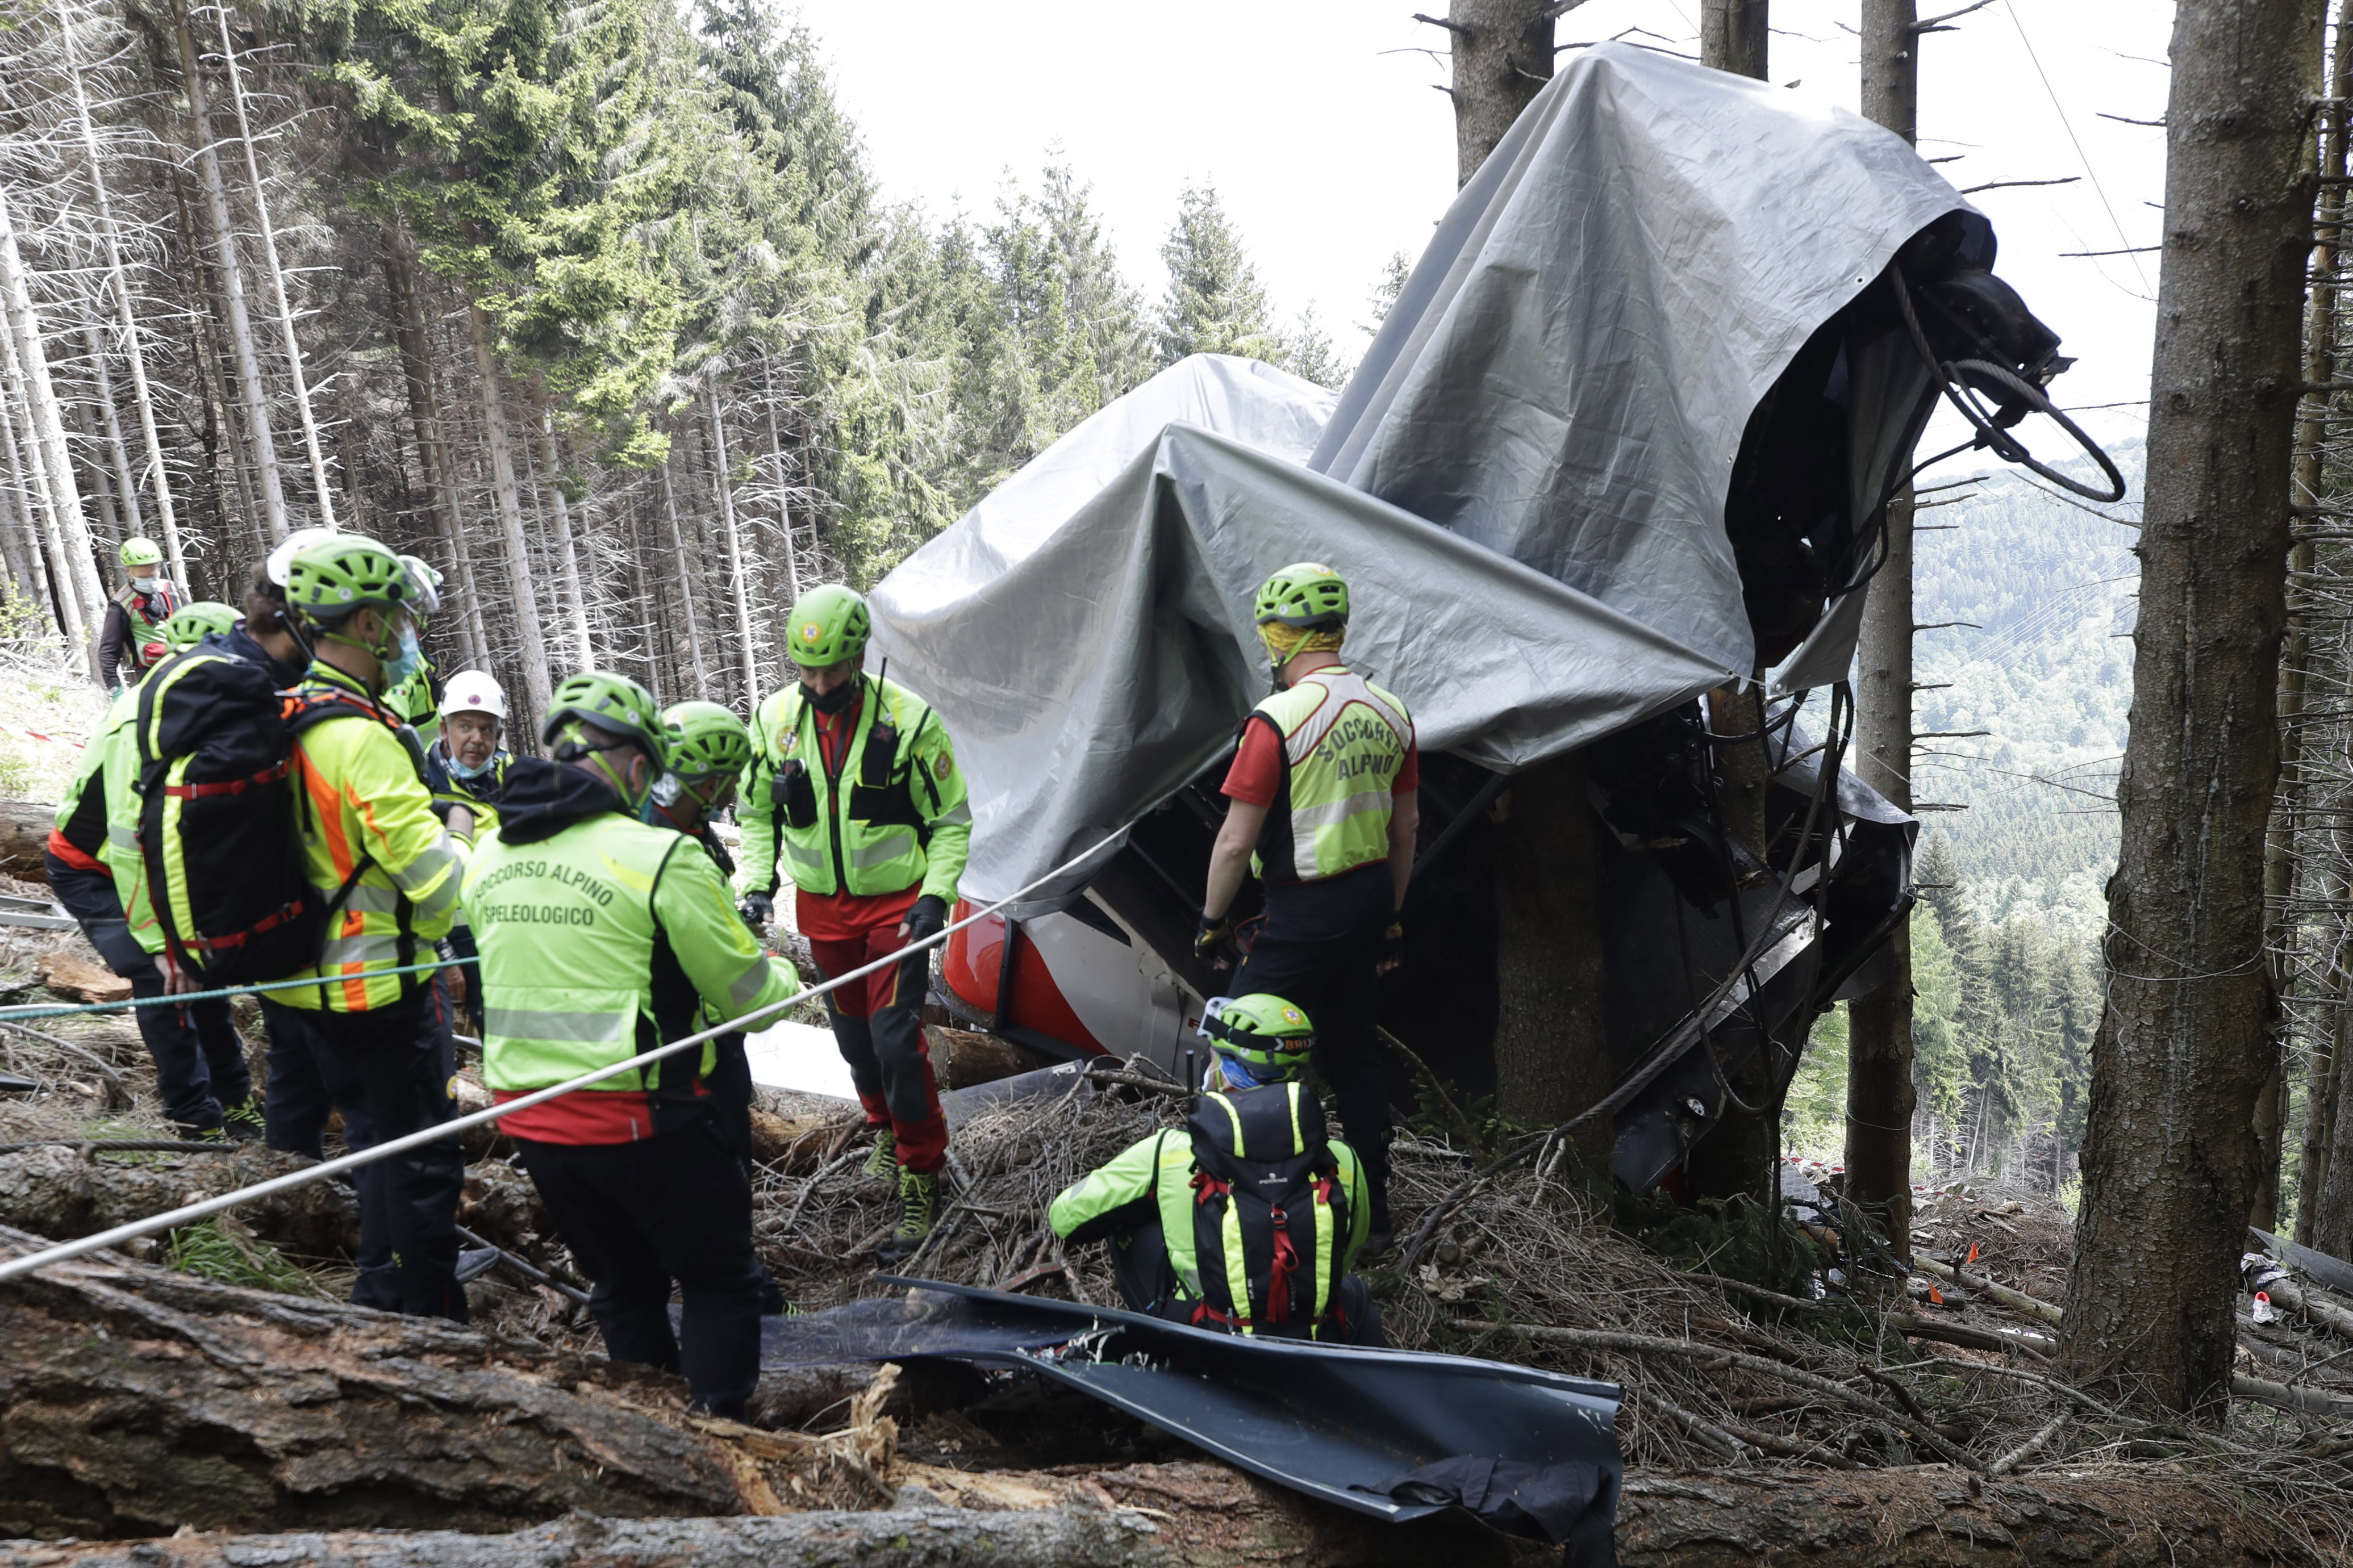 Rescuers search for evidence in the wreckage